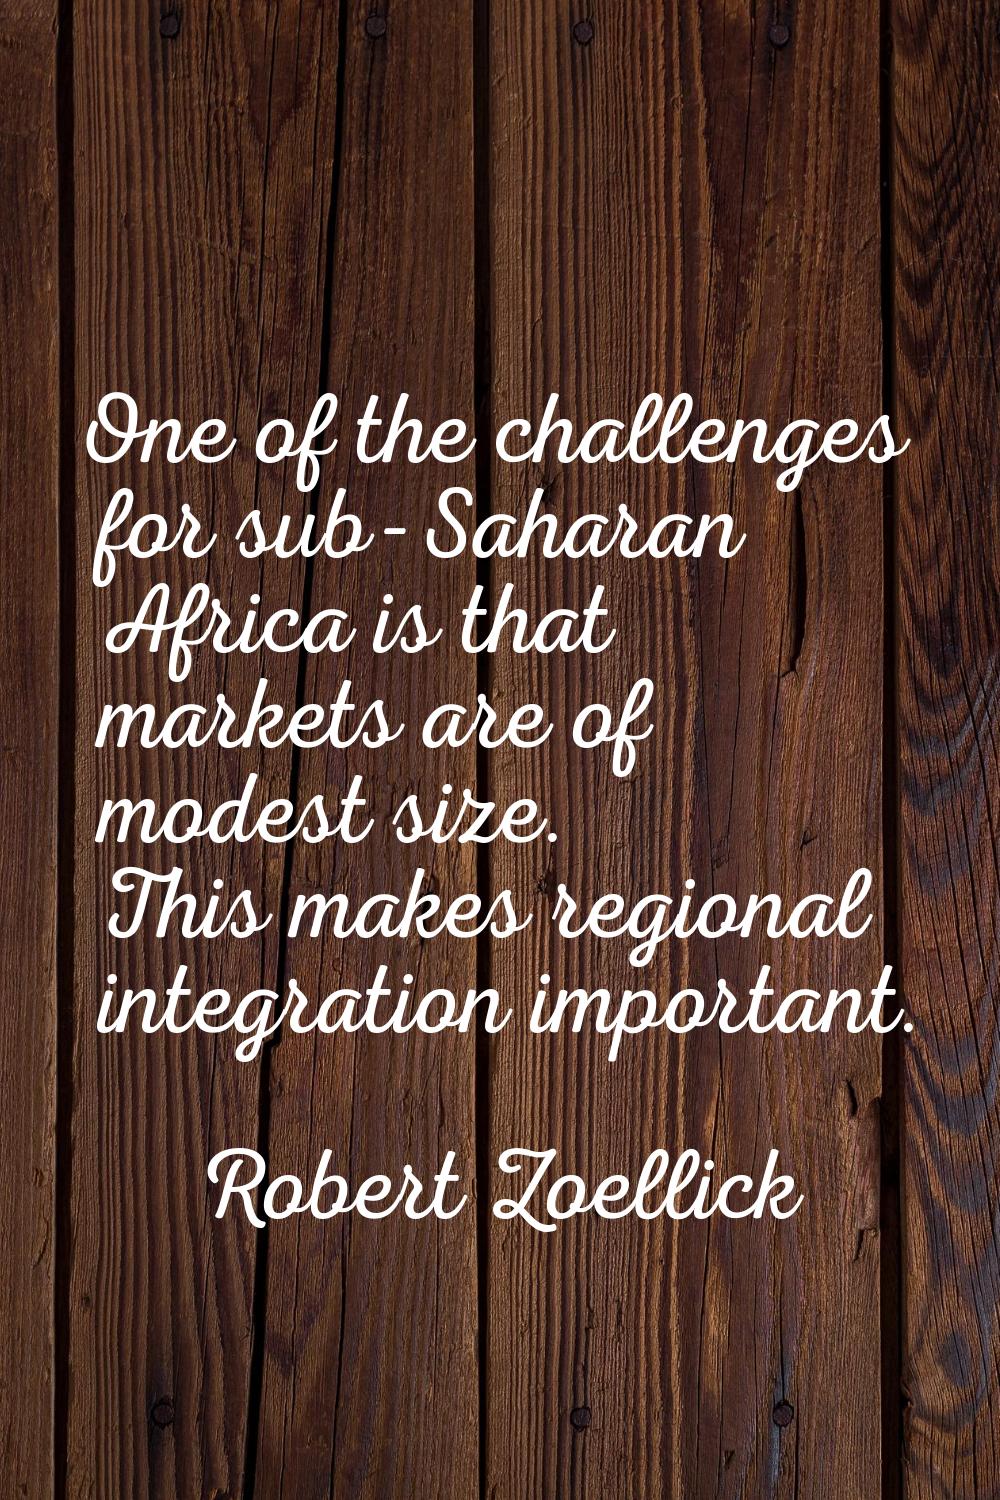 One of the challenges for sub-Saharan Africa is that markets are of modest size. This makes regiona